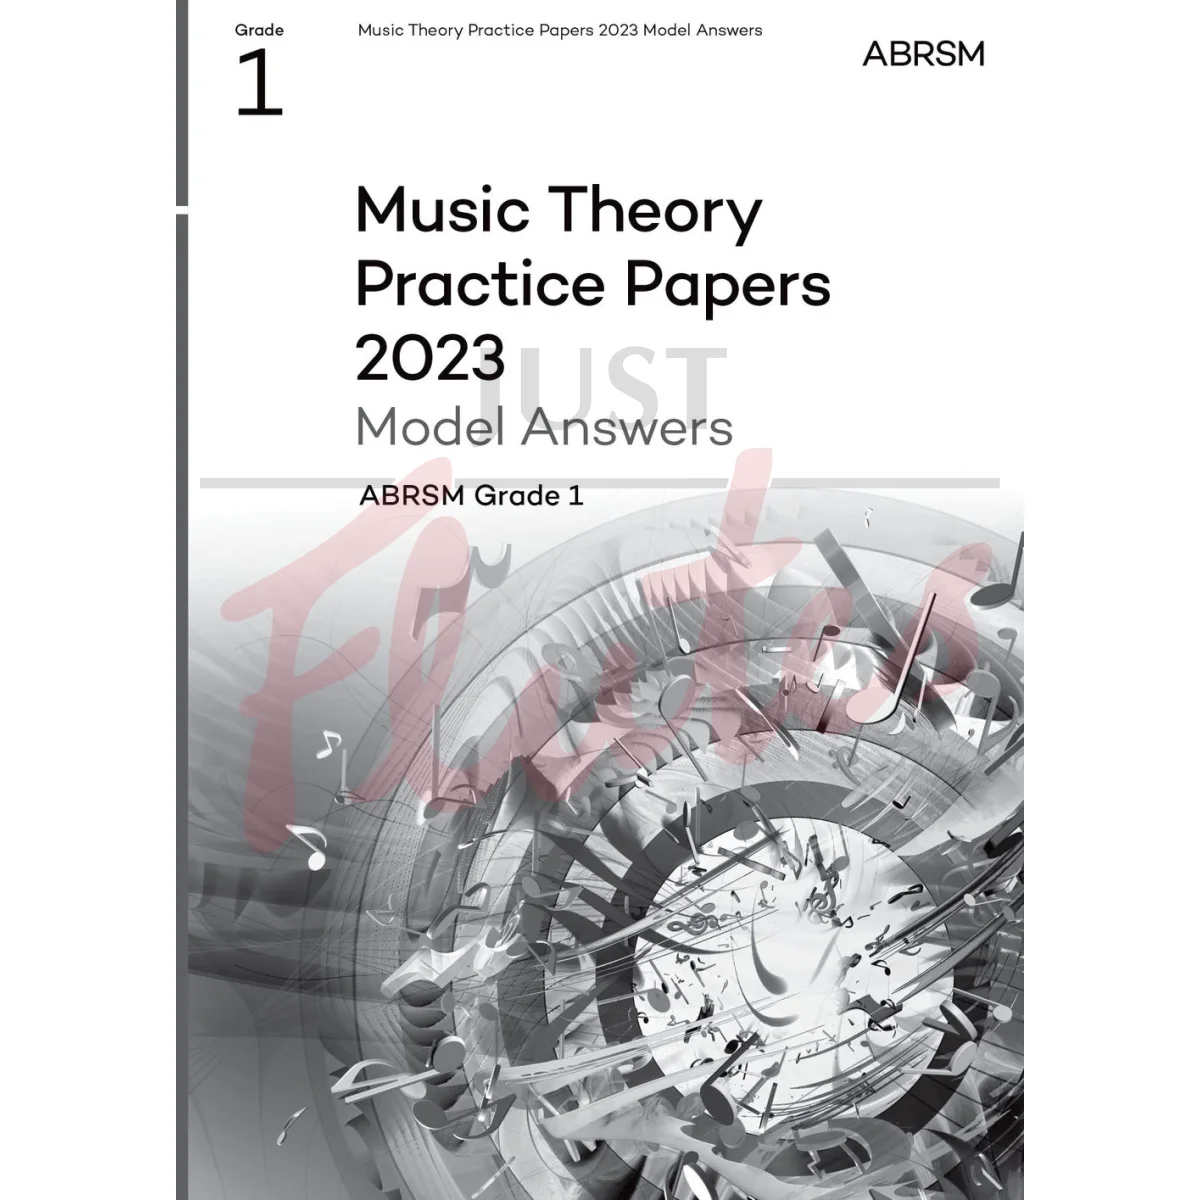 Music Theory Practice Papers 2023 Grade 1 - Model Answers